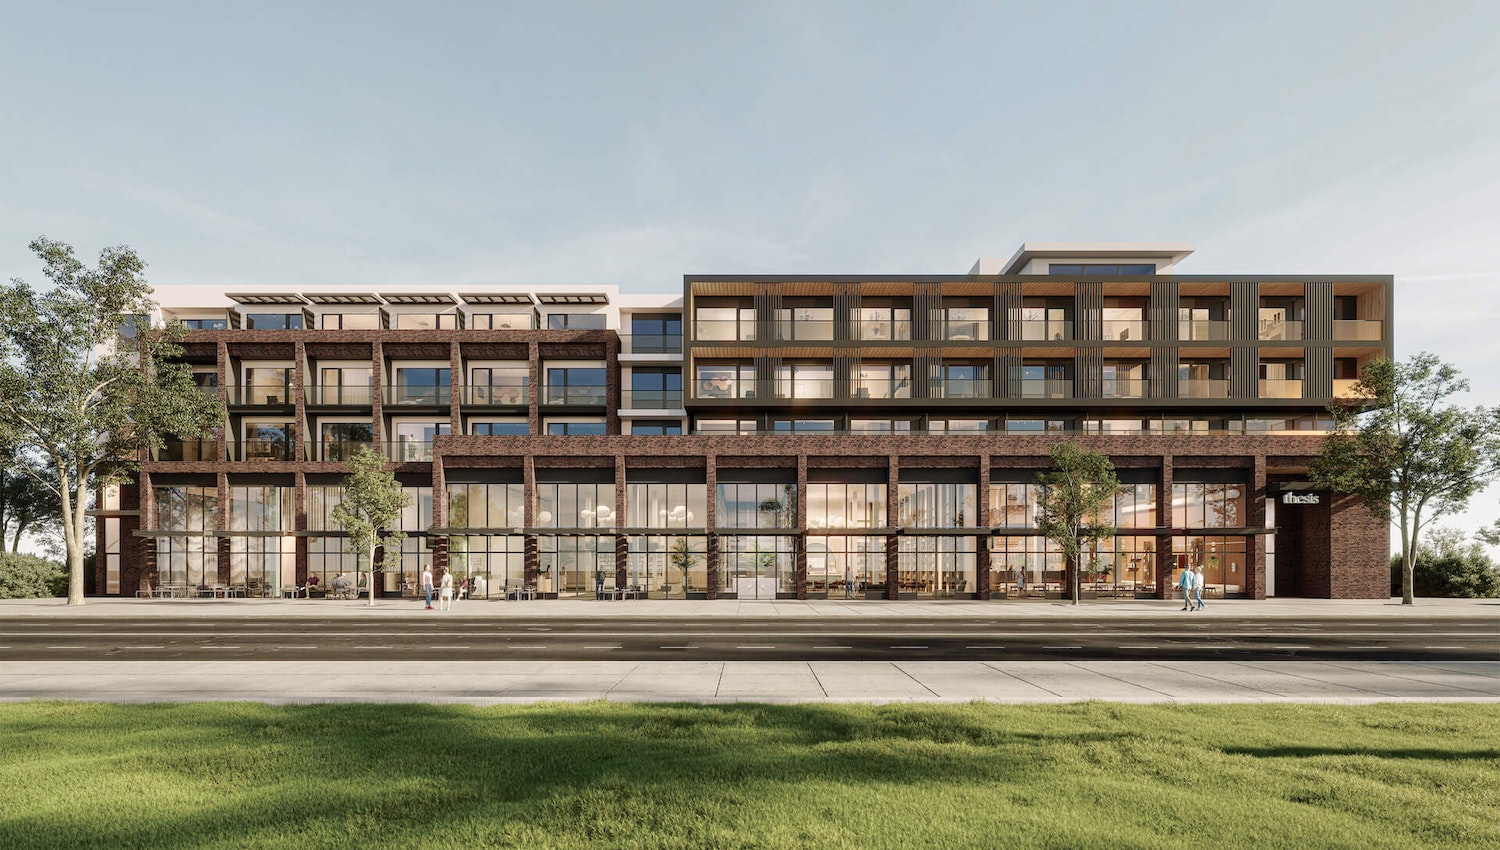 A mixed-use Oakridge lowrise offering retail space, offices, and 68 condos.